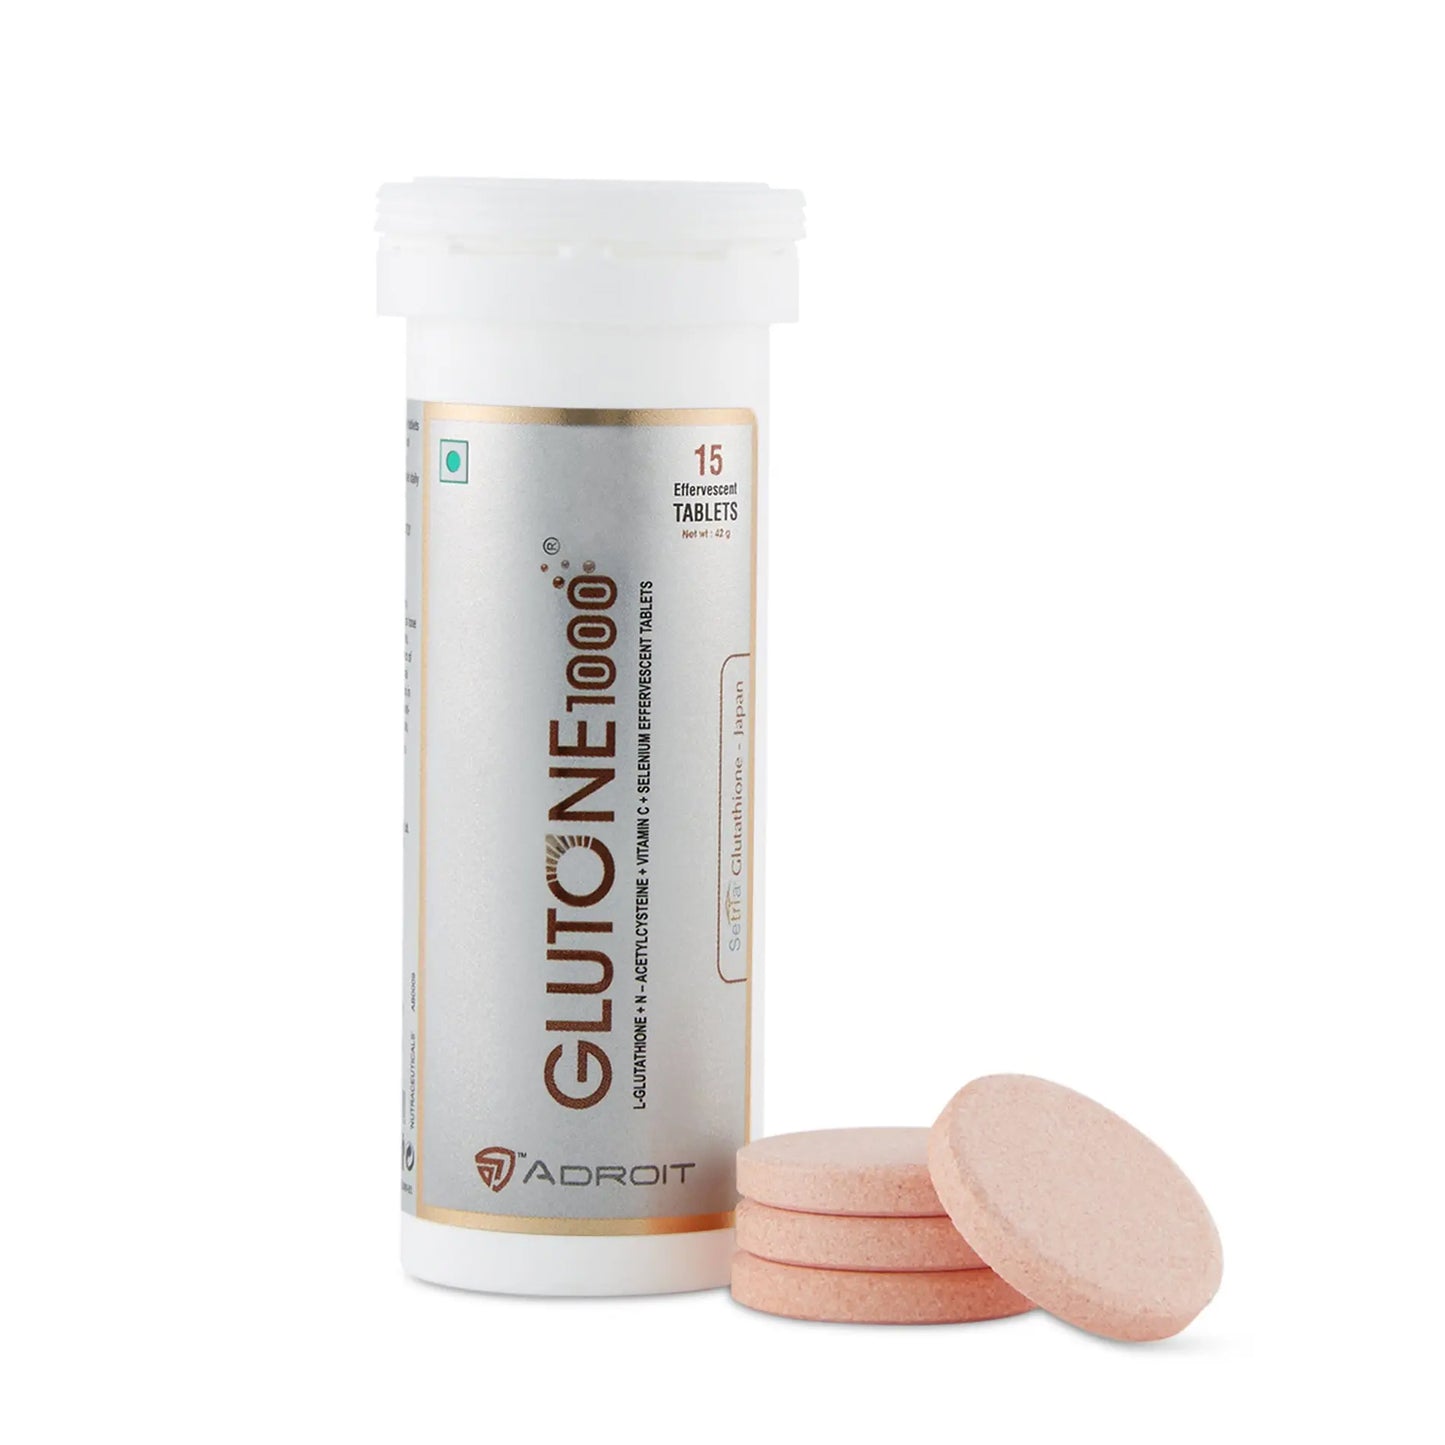 Skin Glow Glutone 1000, 15 Tablets Super Value Combo - Pack Of 16